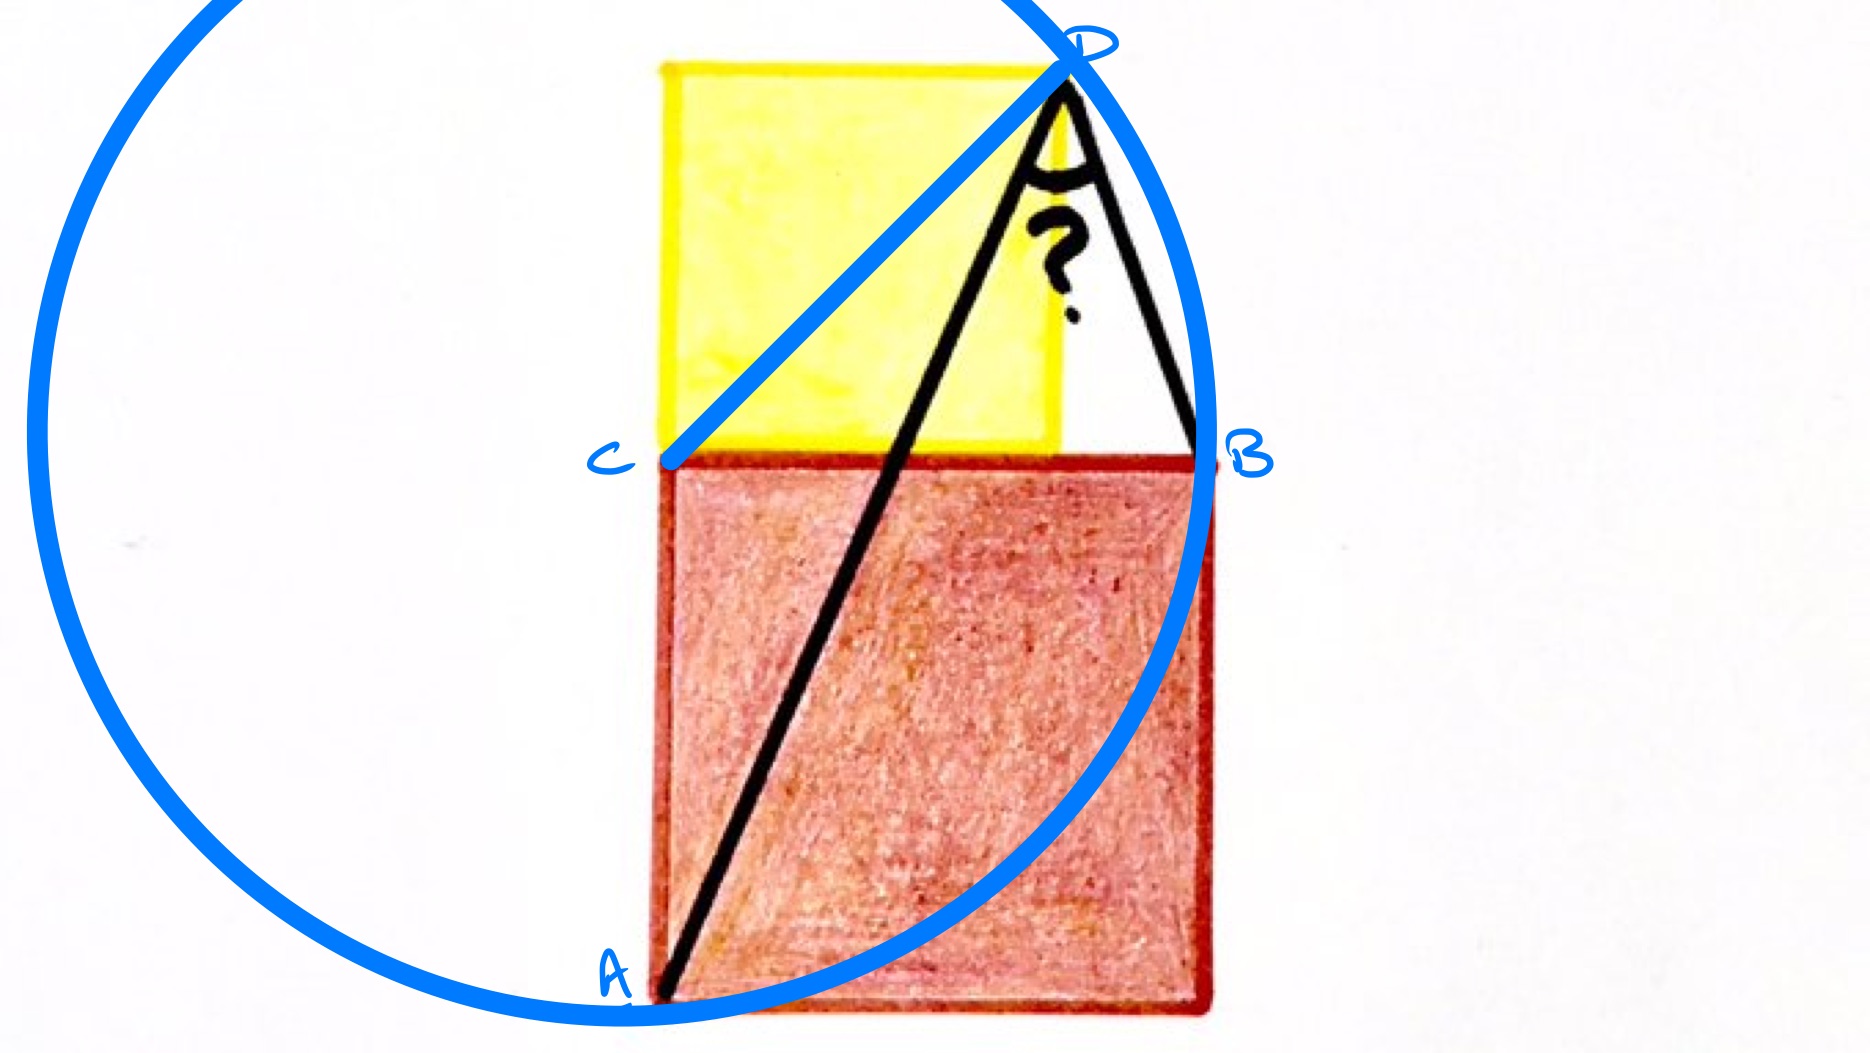 Two squares labelled